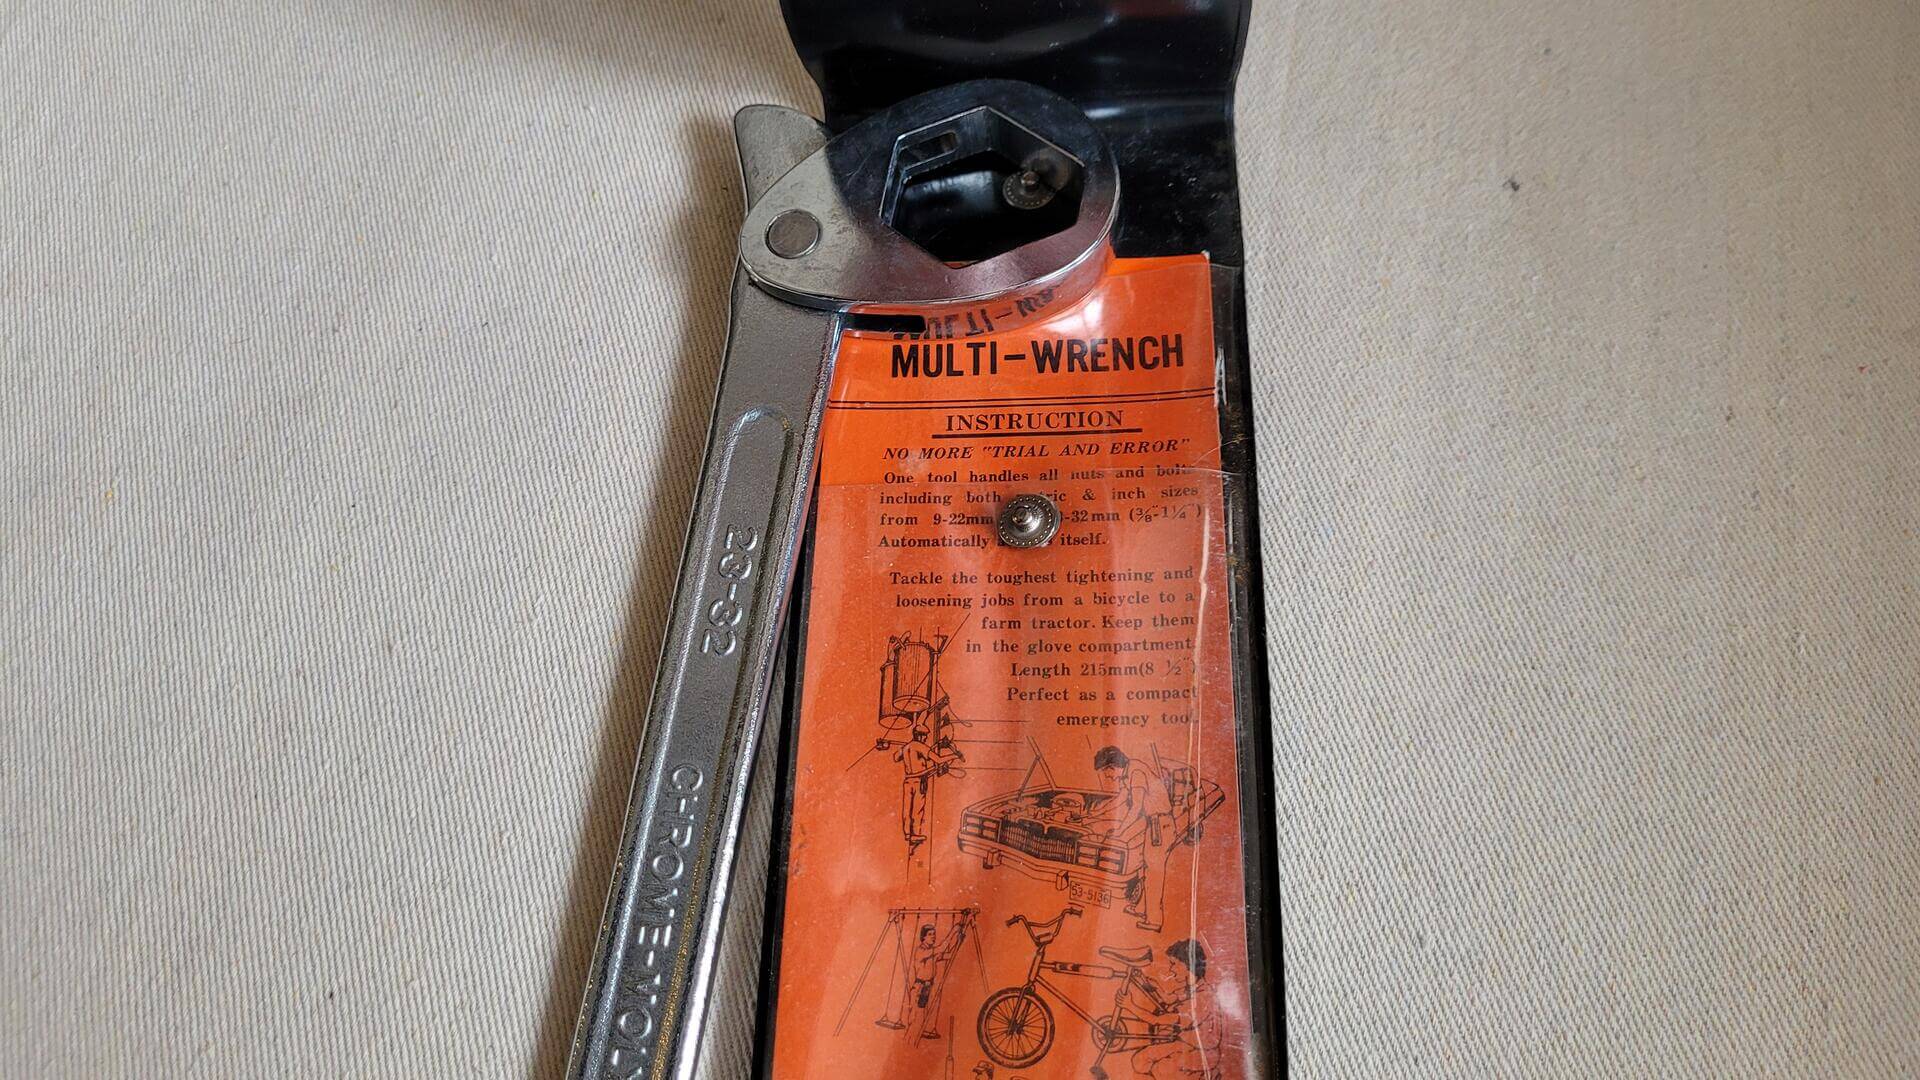 sonic-adjustable-multi-wrench-swivel-head-tool-23-32-vintage-collectible-automotive-mechanic-hand-tools-spanner